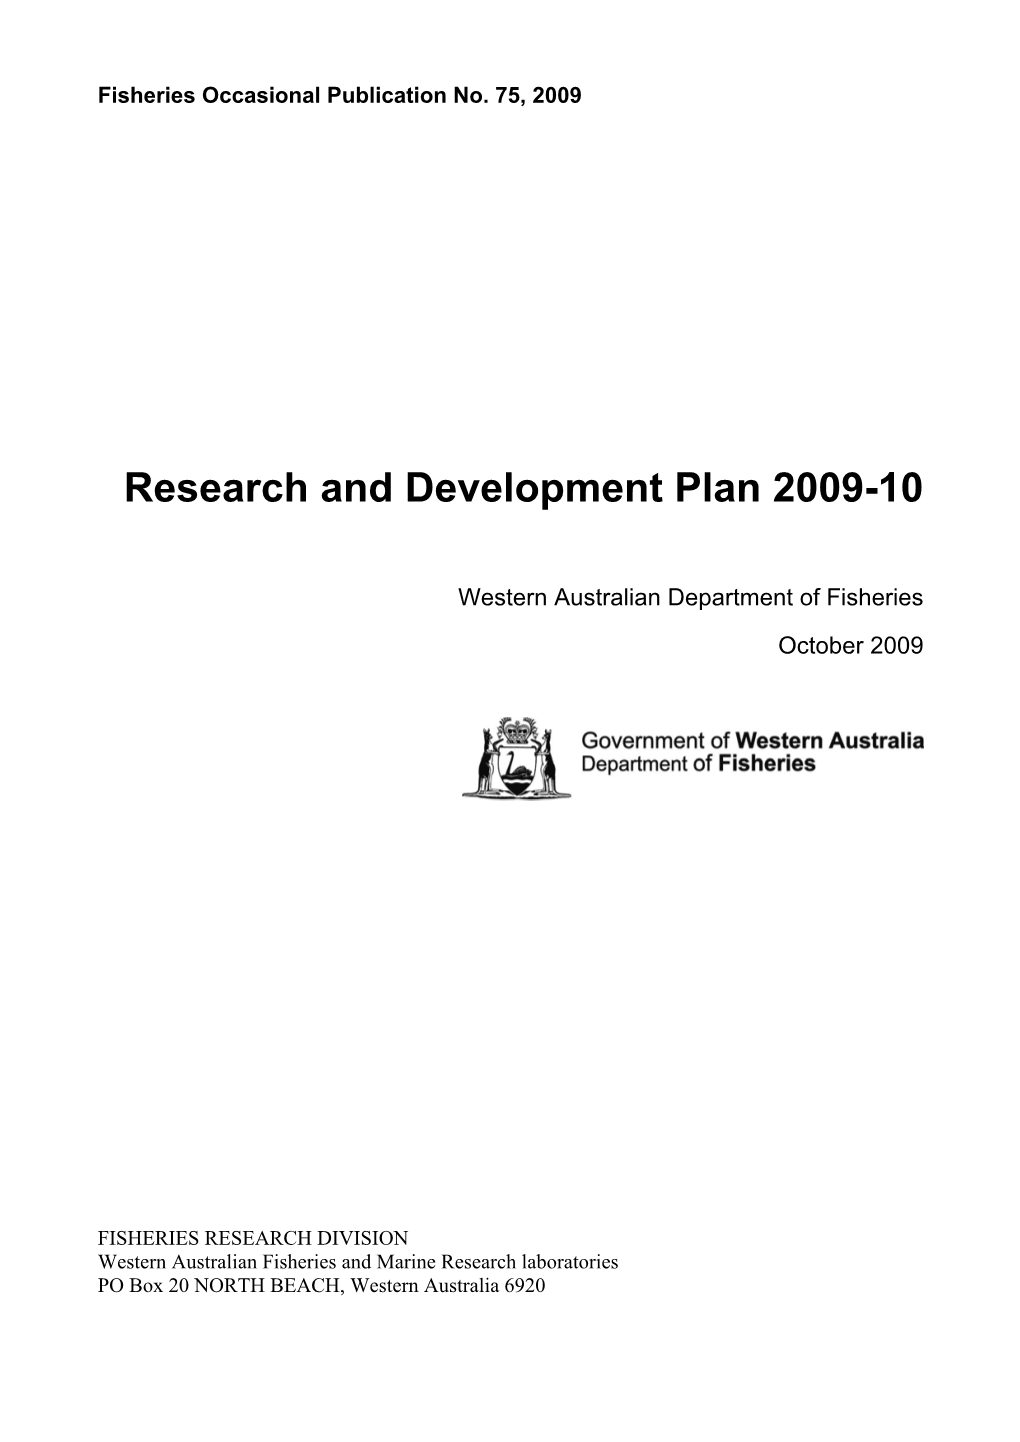 Research and Development Plan 2009-10